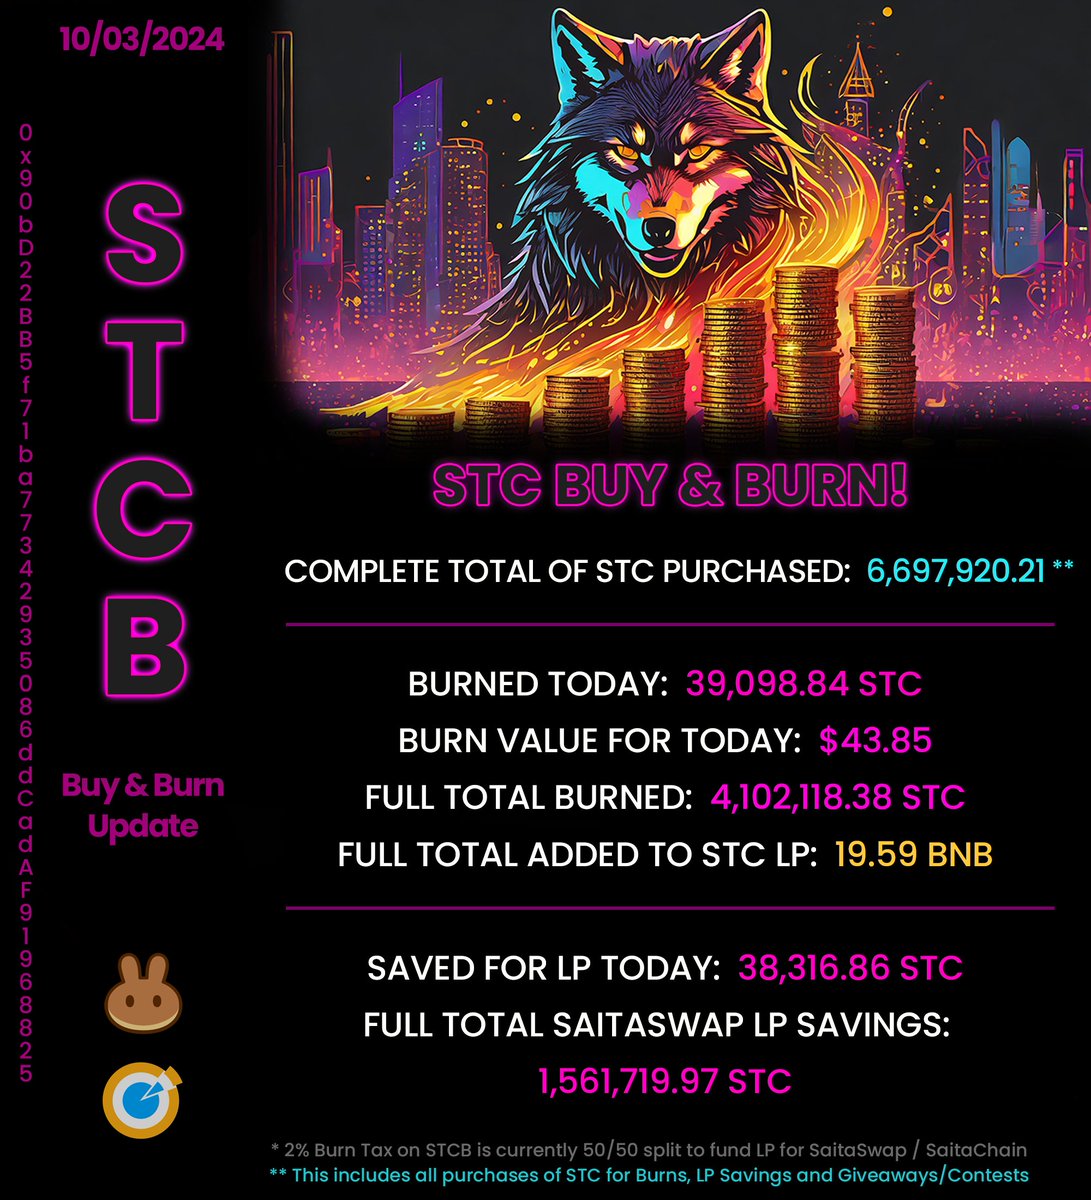 ITS TIME TO BURNNNNNNN!!!! 🔥🔥🔥 - Time to gather around the fire and feel that warmth #Wolfpack 

Tnx: bscscan.com/tx/0x843549b02…

#CryptoNews #Cryptocurency #Burn #BNB #Ethereum #100xgem #investing #PriceMovers #community #CommunityFirst #CommunitySpirit #STCB #SaitaChainCoin…